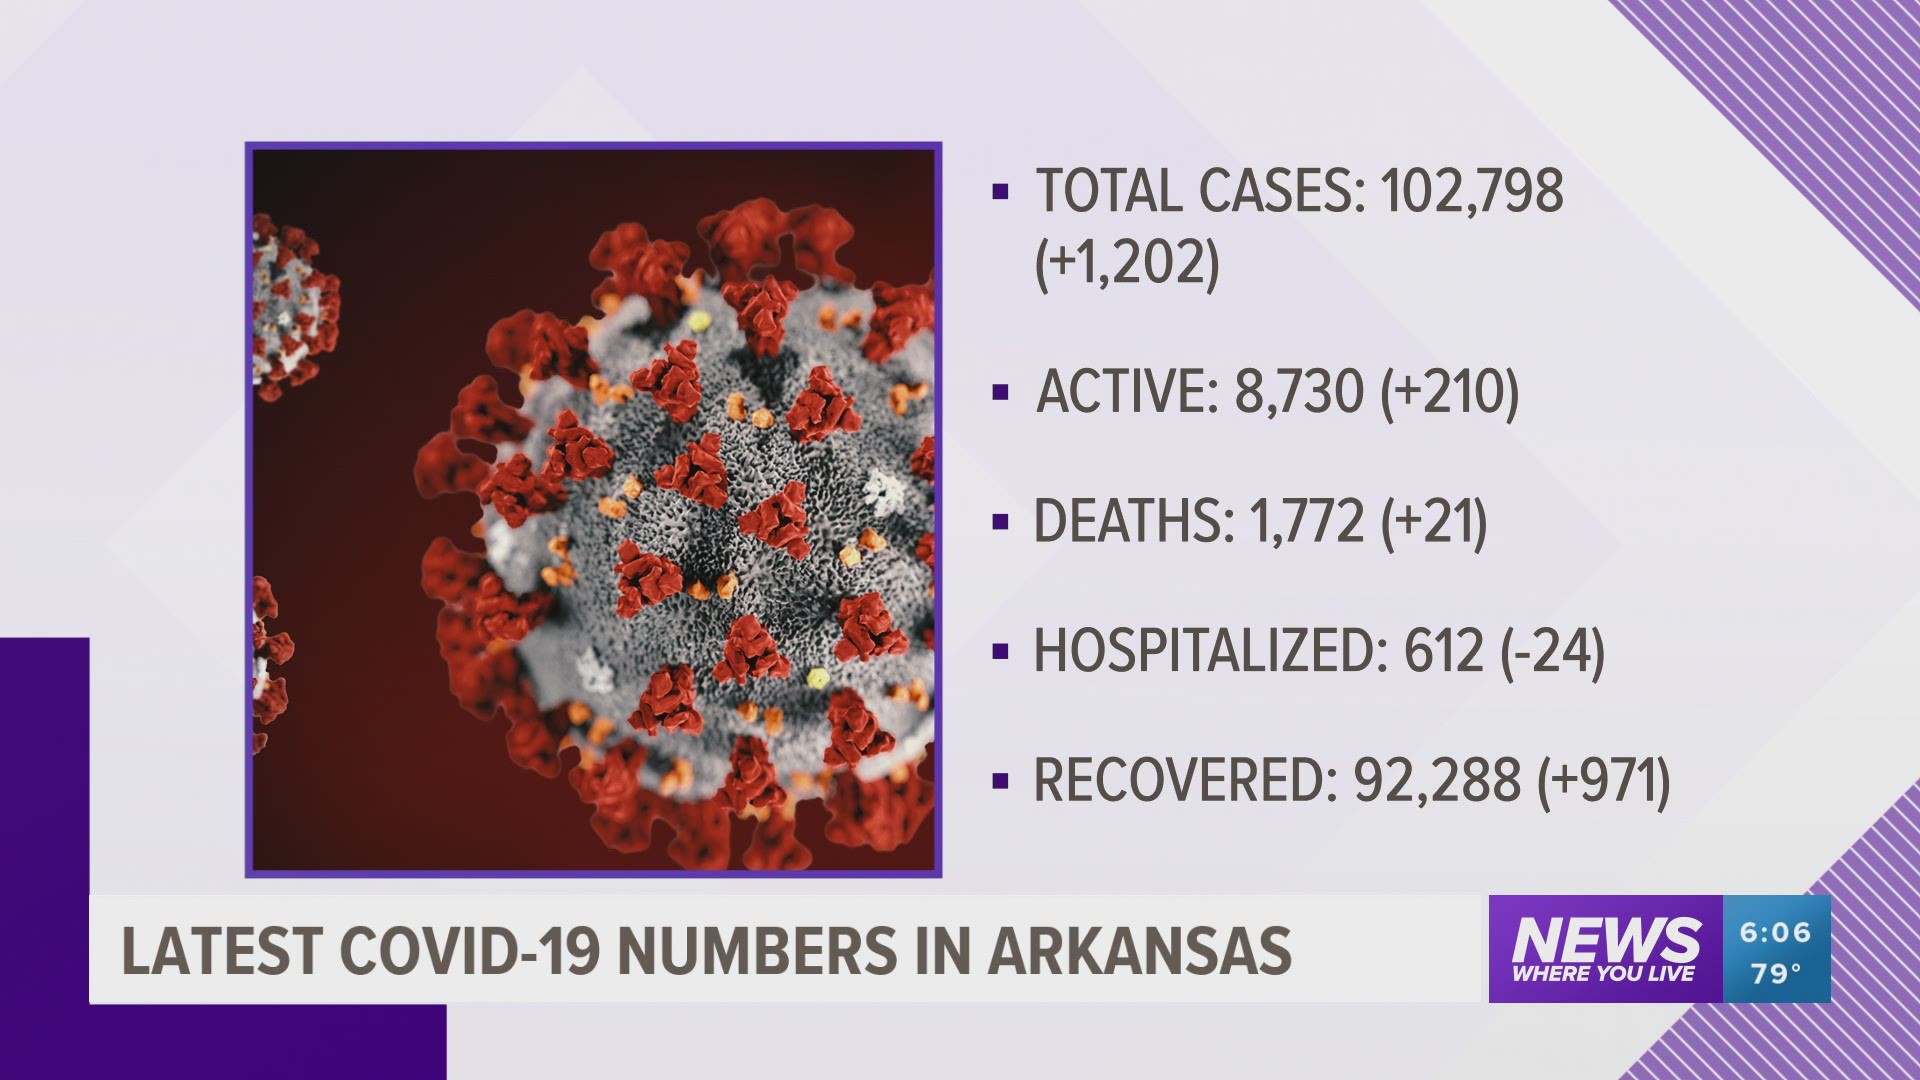 A look at the latest case numbers for the coronavirus in Arkansas on Thursday, October 22. https://bit.ly/3iqGRnx